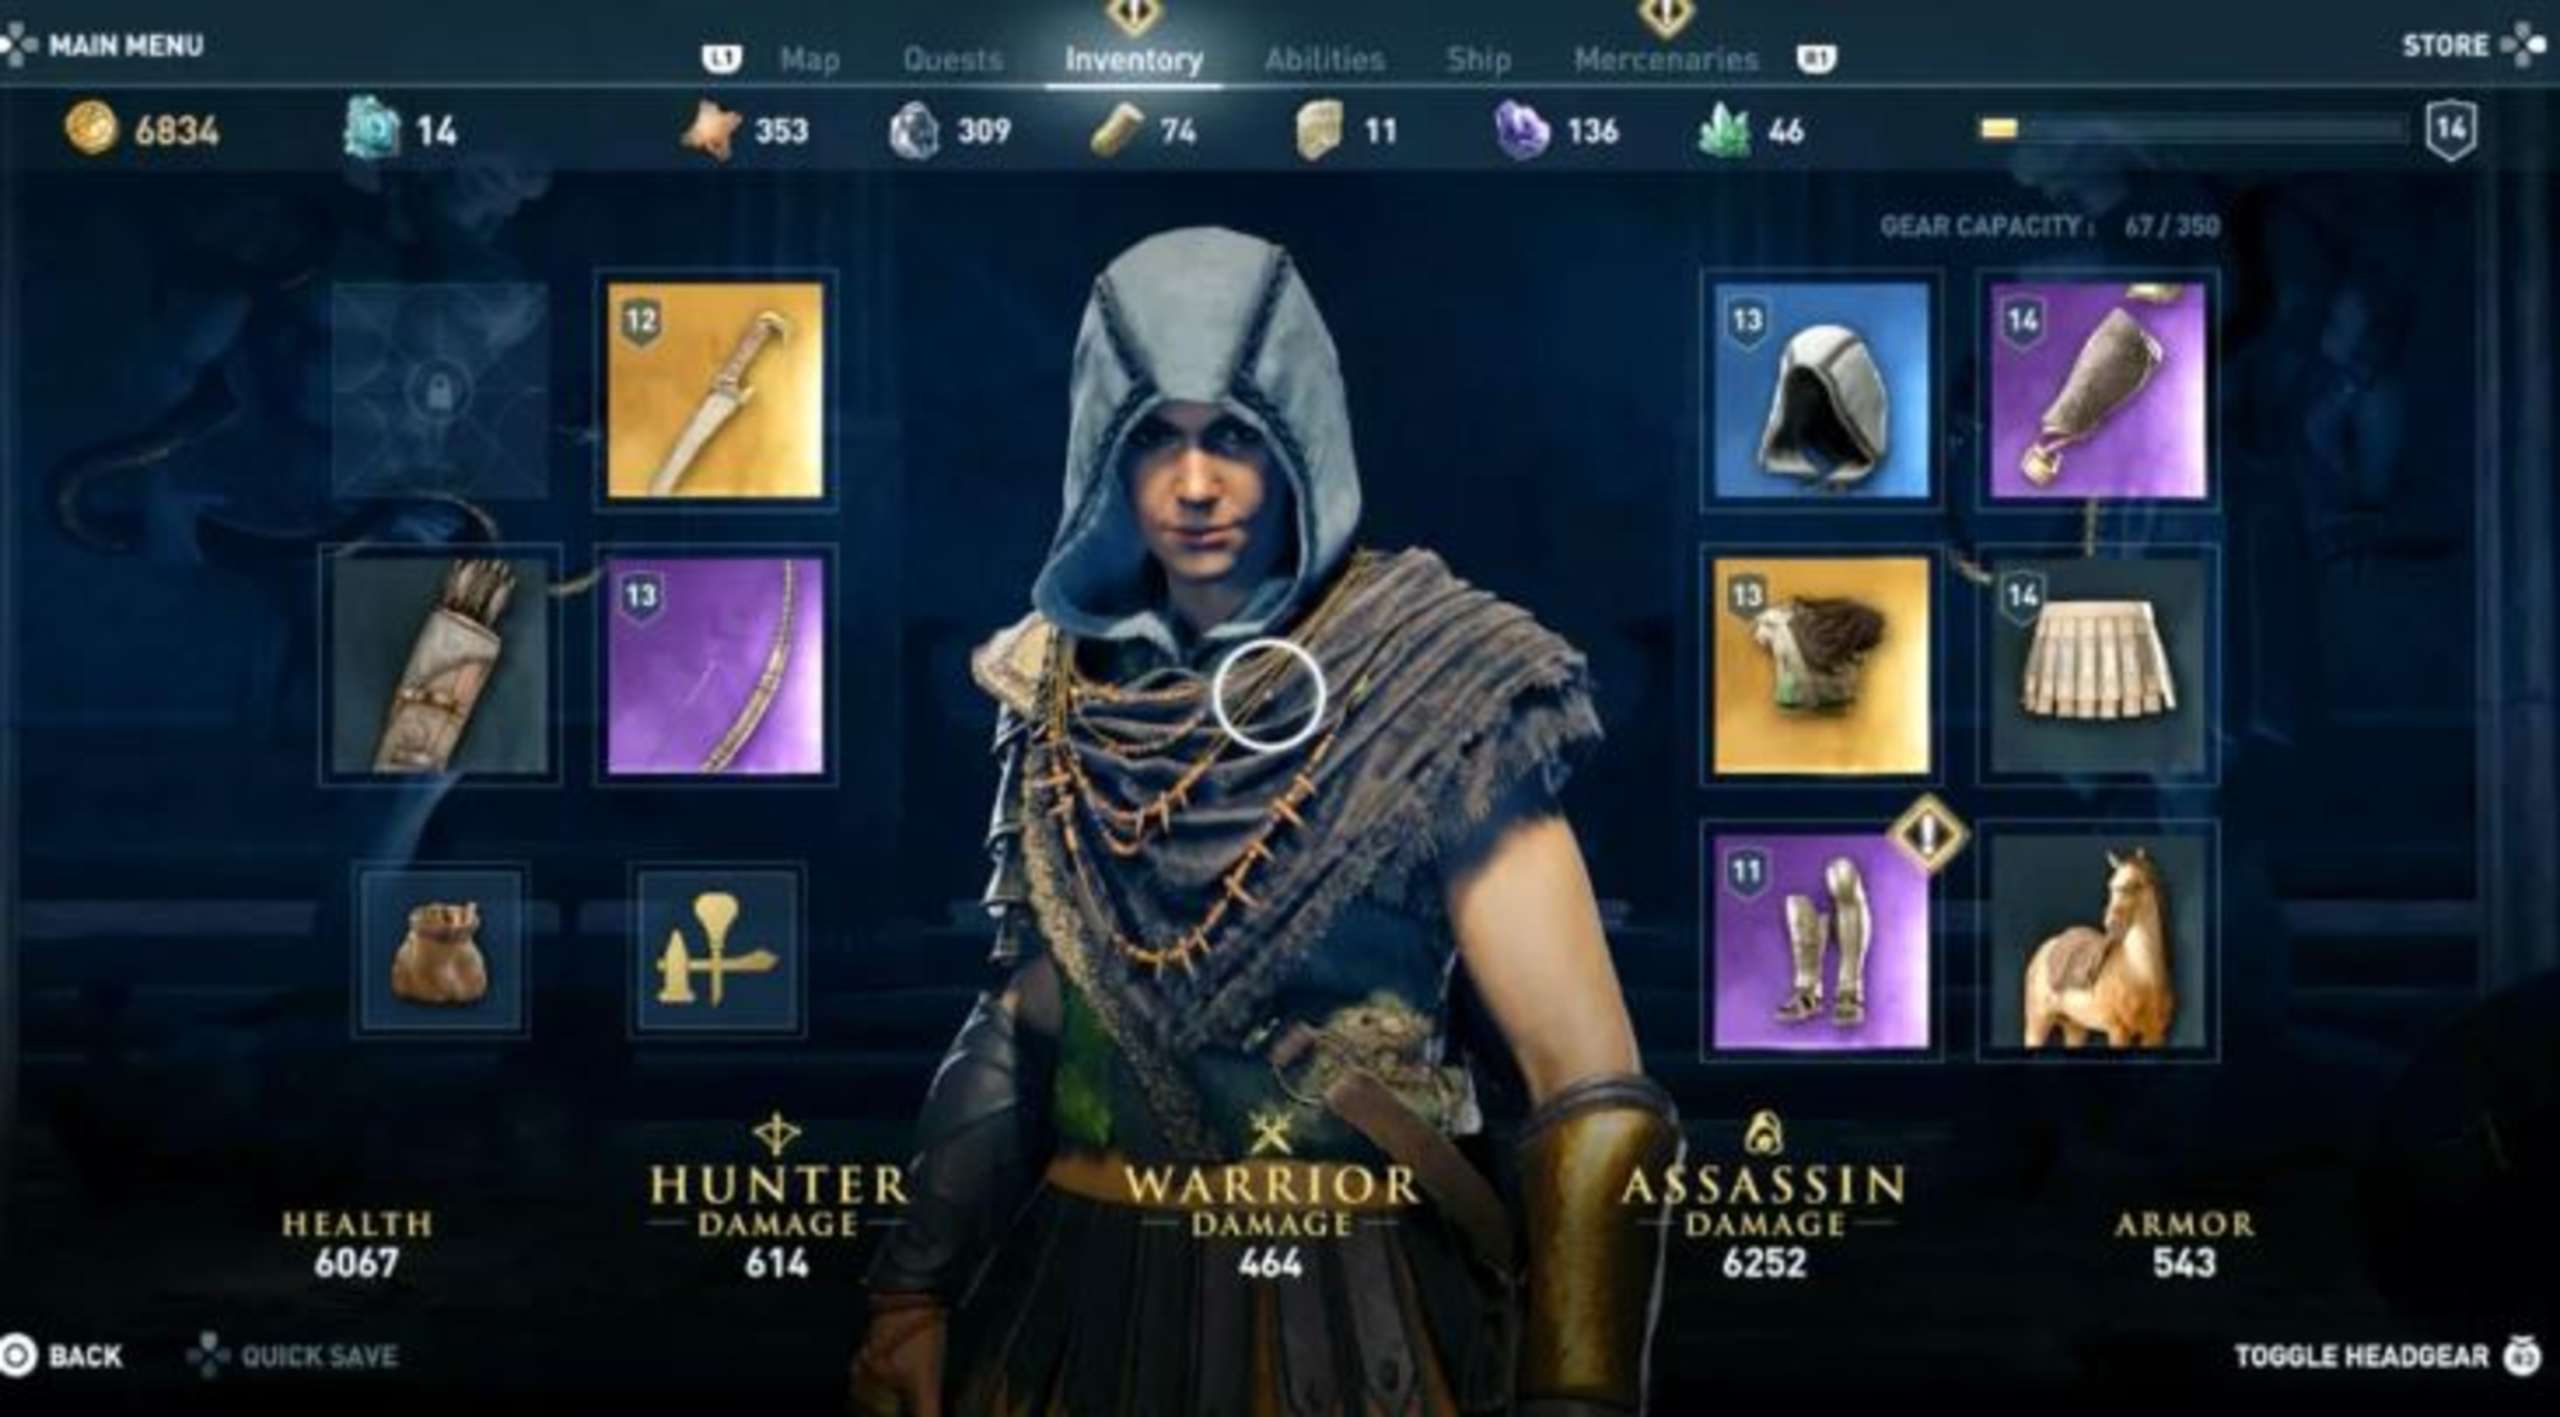 There Have Been Several Incarnations Of Assassin’s Creed’s Loot And Equipment, But AC Red’s Appearance Should Be Closer To That Of Odyssey Than Valhalla